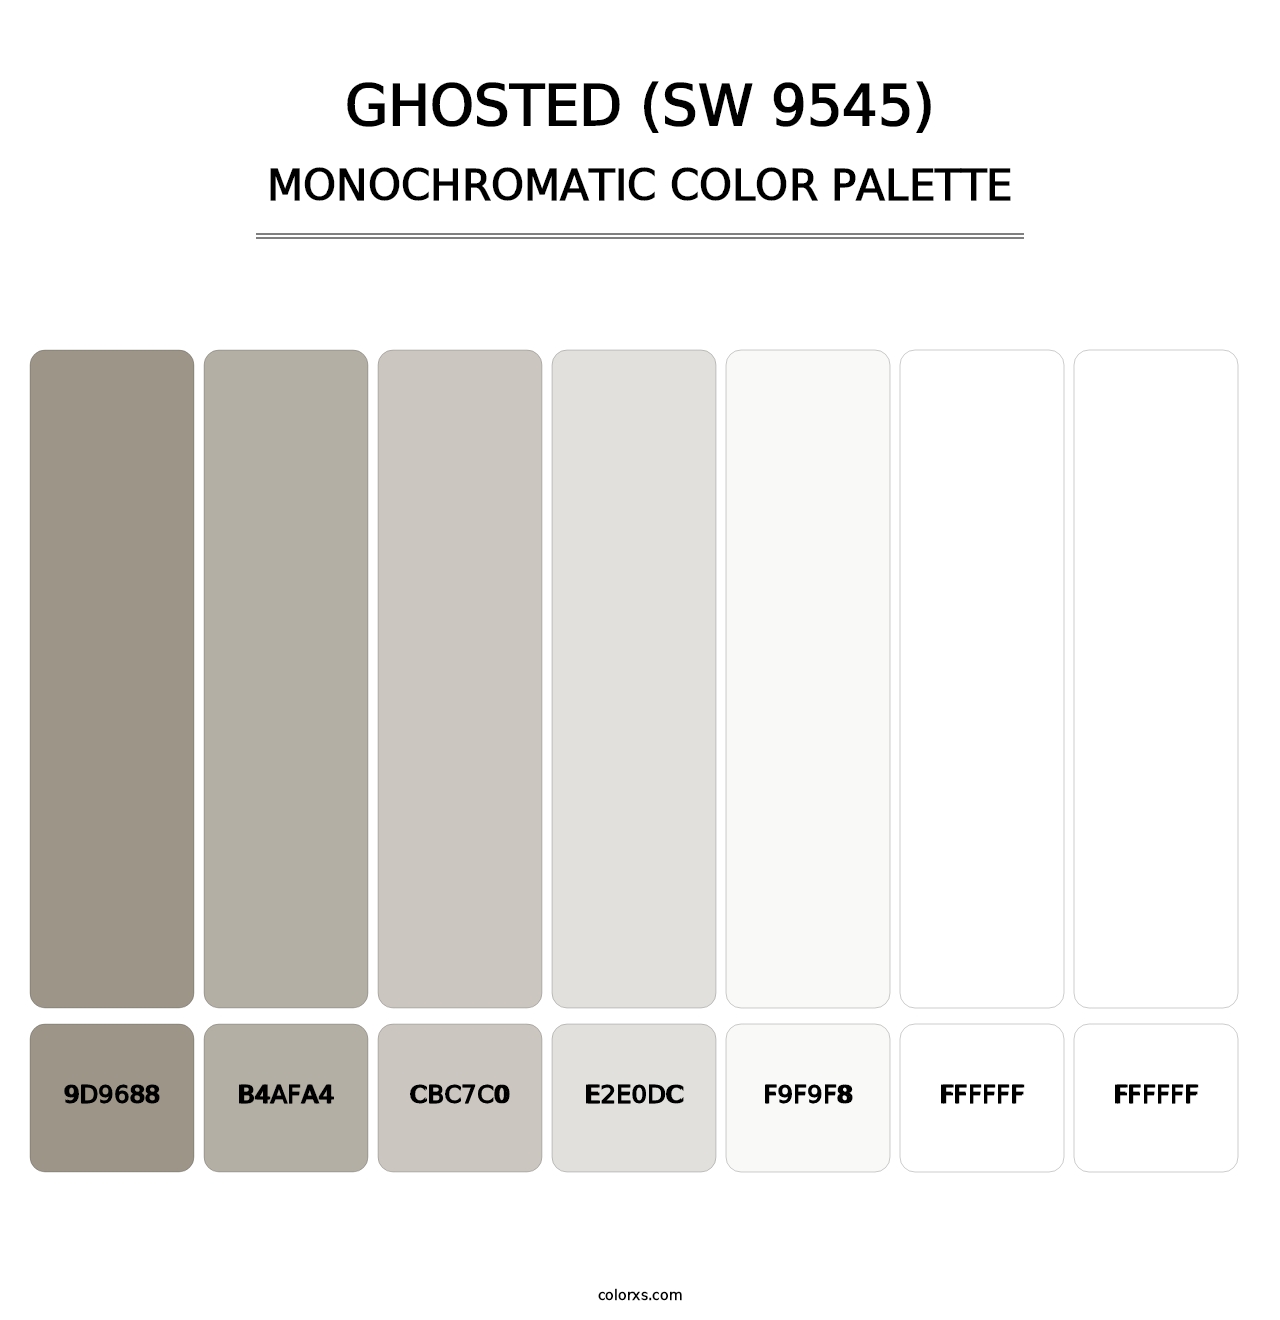 Ghosted (SW 9545) - Monochromatic Color Palette